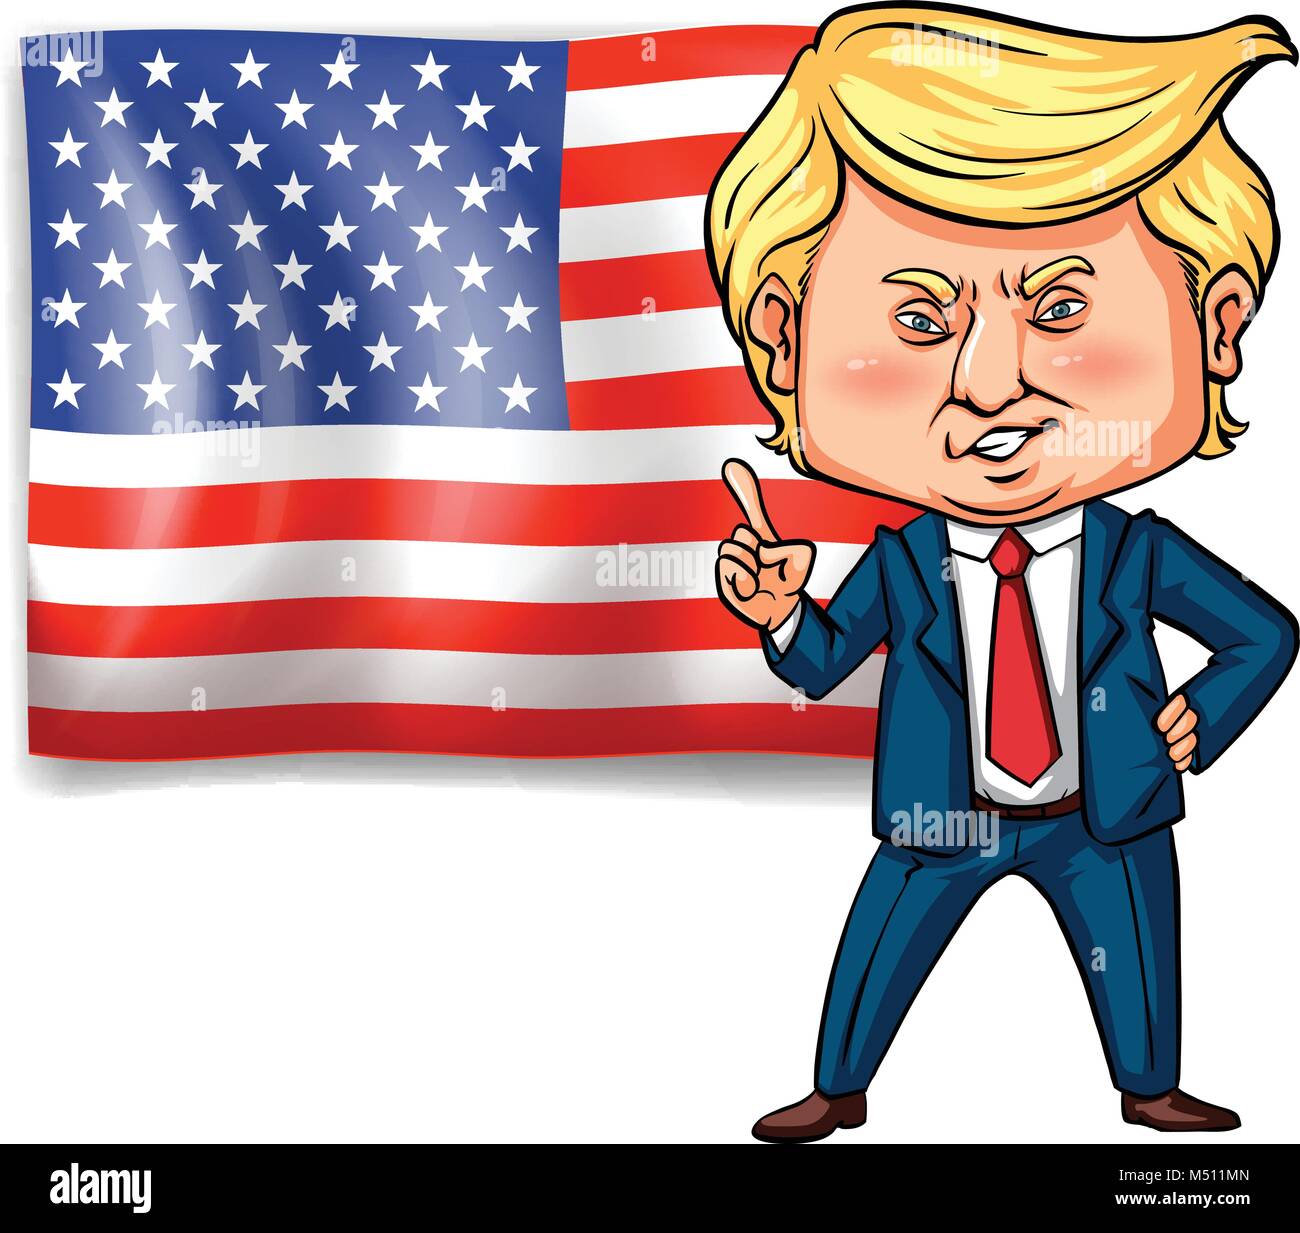 US president Trump with American flag in background illustration Stock Vector